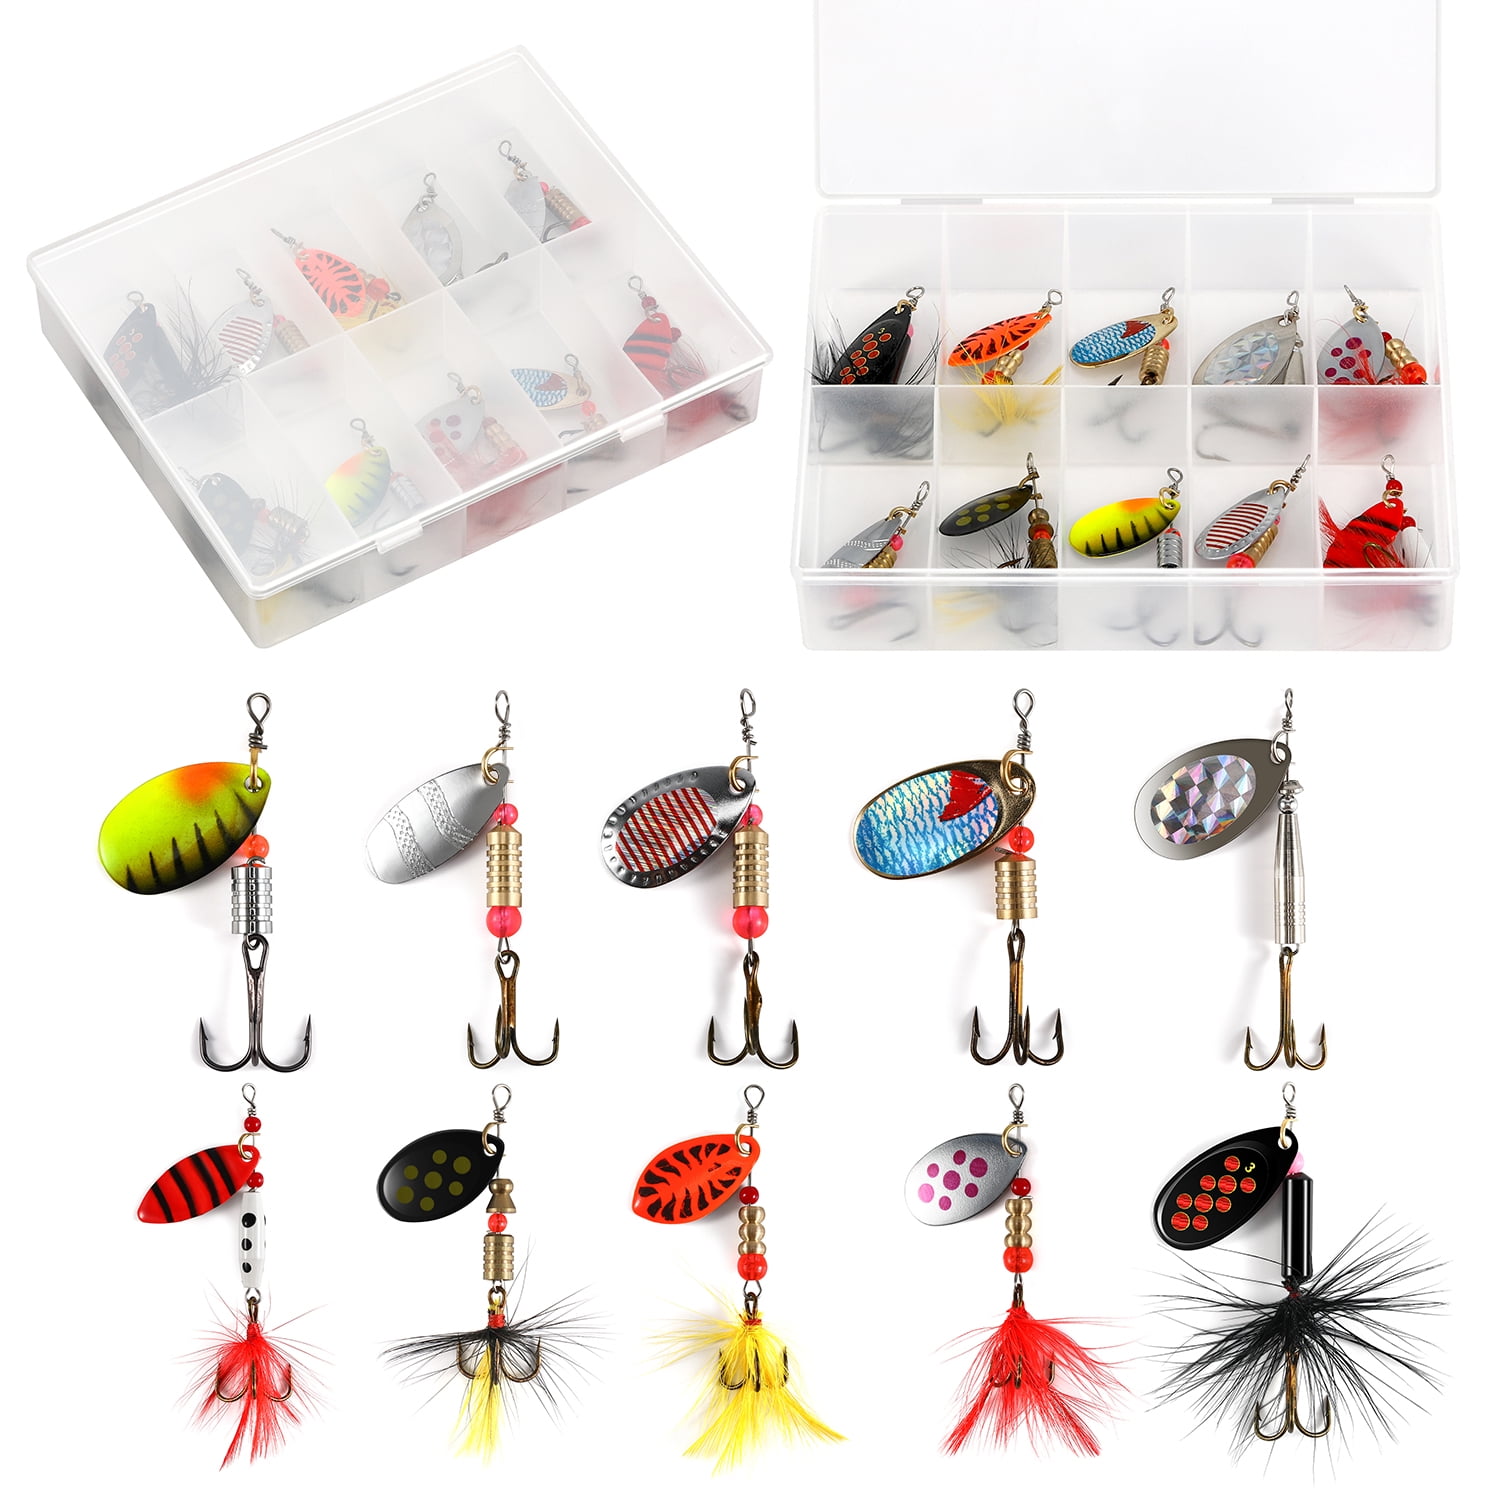 thkfish 1/2 oz Spinner Baits for Bass Fishing Saltwater Freshwater Spinnerbaits Fishing Lures for Bass Trout Pike Salmon 8 Pieces/Set 